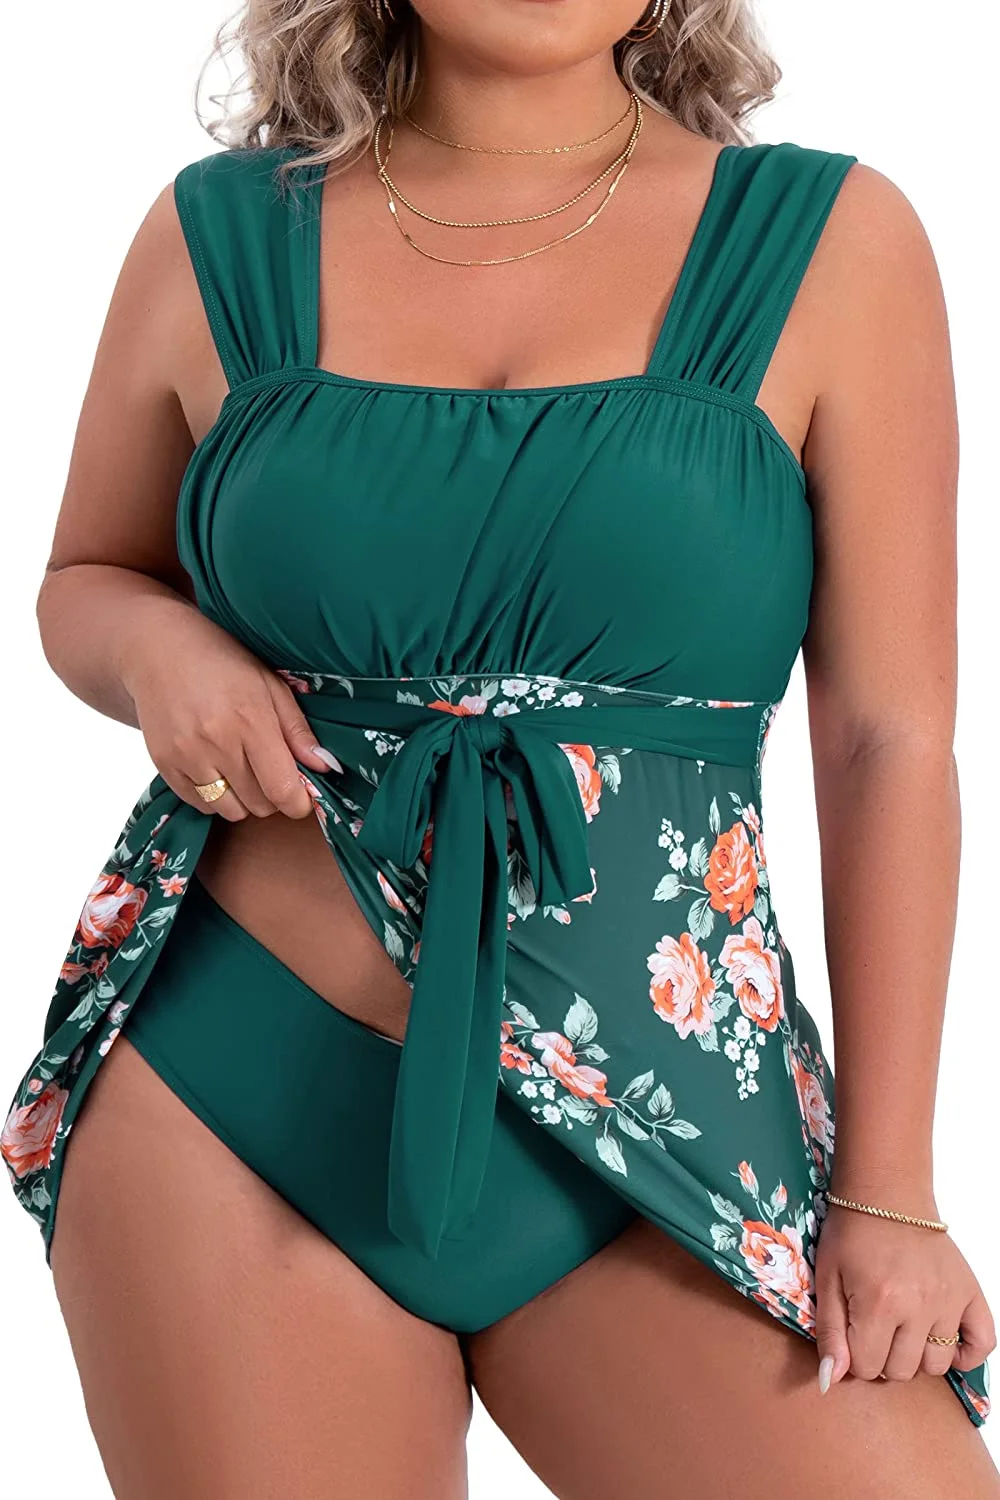 Ruched Floral Plus Size Two Piece Tankini Swimsuits Swimdress